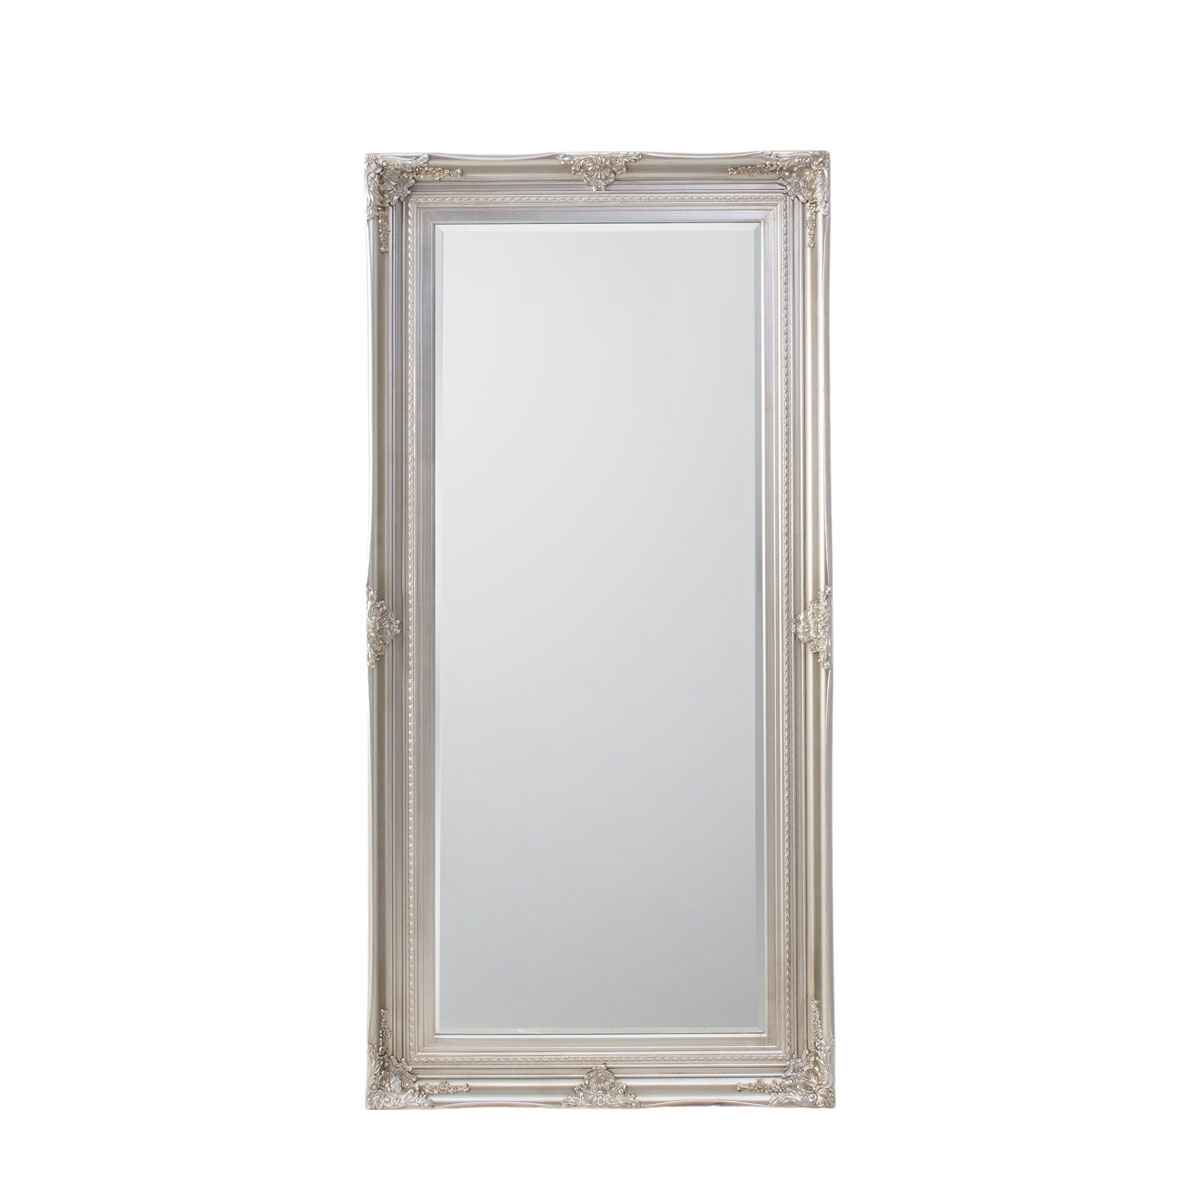 Hampshire Leaner Mirror Antique Silver 1700x840mm